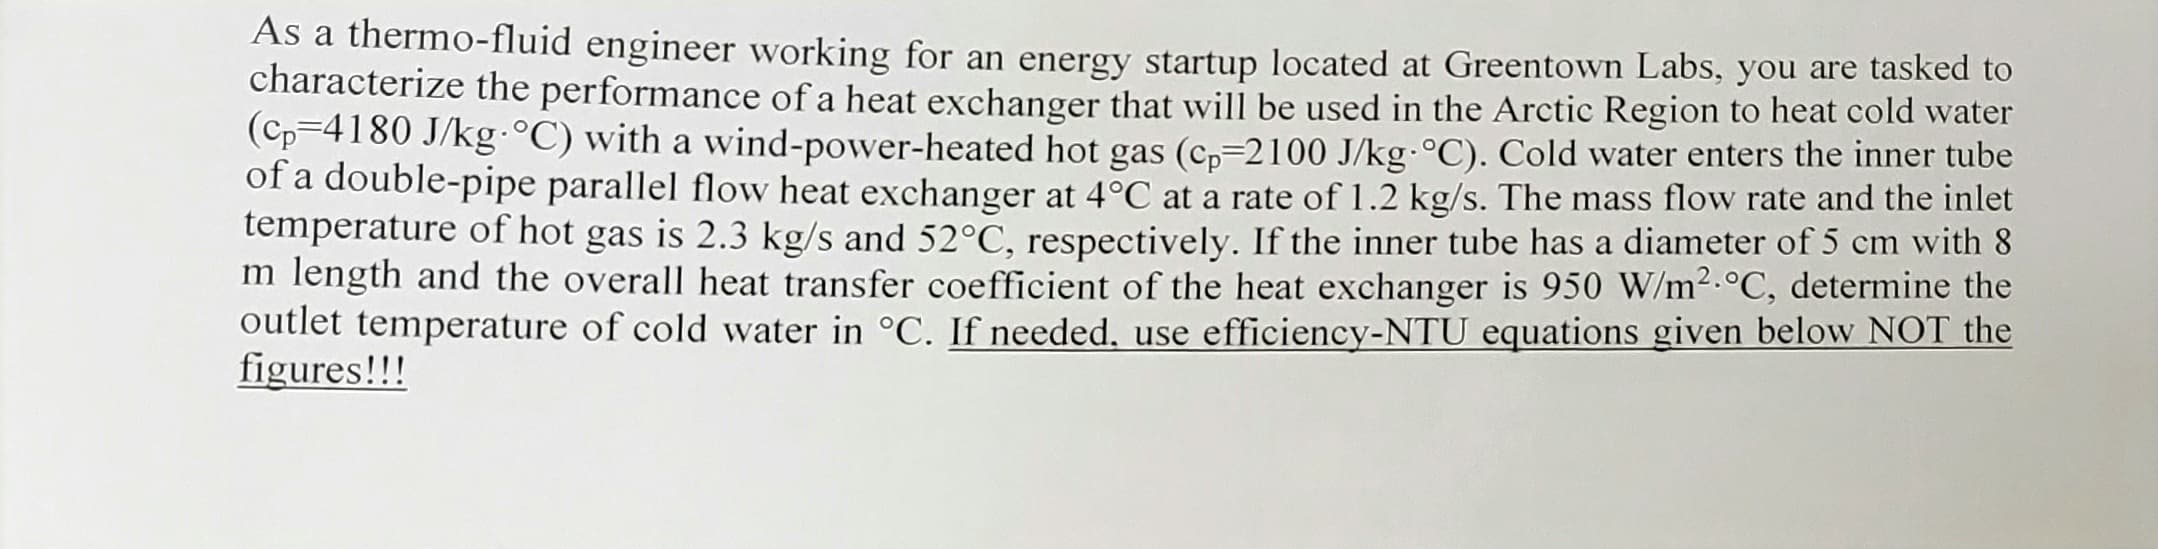 As a thermo-fluid engineer working for an energy startup located at Greentown Labs, you are tasked to
characterize the performance of a heat exchanger that will be used in the Arctic Region to heat cold water
(Cp=4180 J/kg °C) with a wvind-power-heated hot gas (c,=2100 J/kg·°C). Cold water enters the inner tube
of a double-pipe parallel flow heat exchanger at 4°C at a rate of 1.2 kg/s. The mass flow rate and the inlet
temperature of hot gas is 2.3 kg/s and 52°C, respectively. If the inner tube has a diameter of 5 cm with 8
m length and the overall heat transfer coefficient of the heat exchanger is 950 W/m2.°C, determine the
outlet temperature of cold water in °C. If needed, use efficiency-NTU equations given below NOT the
figures!!!
